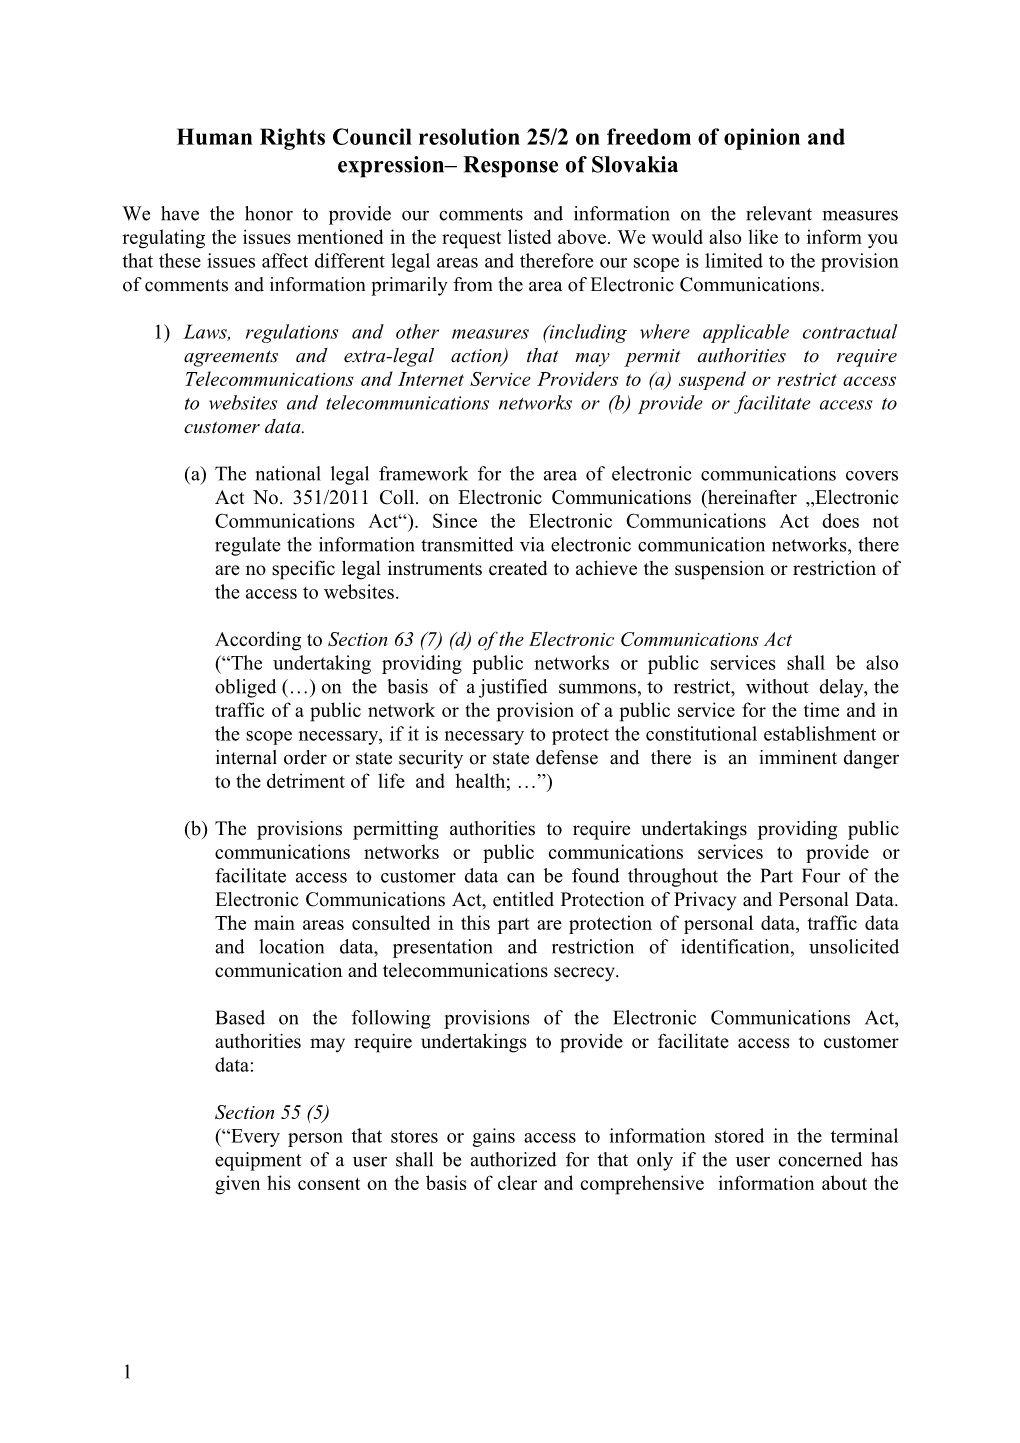 Human Rights Council Resolution 25/2 on Freedom of Opinion and Expression Response of Slovakia